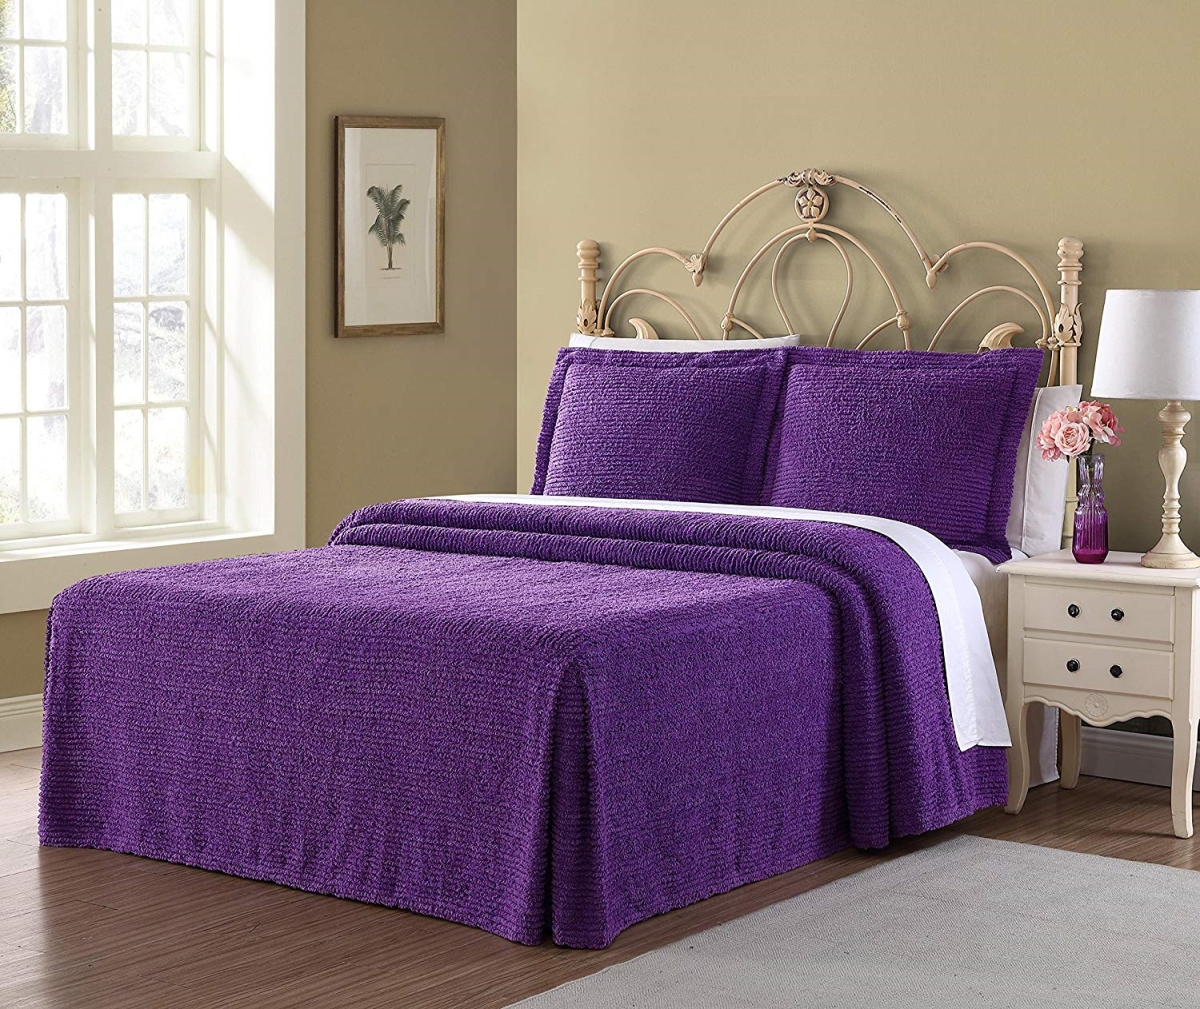 20711804bsp-lil Richland Chenille Solid Bedspread, Purple - King Size